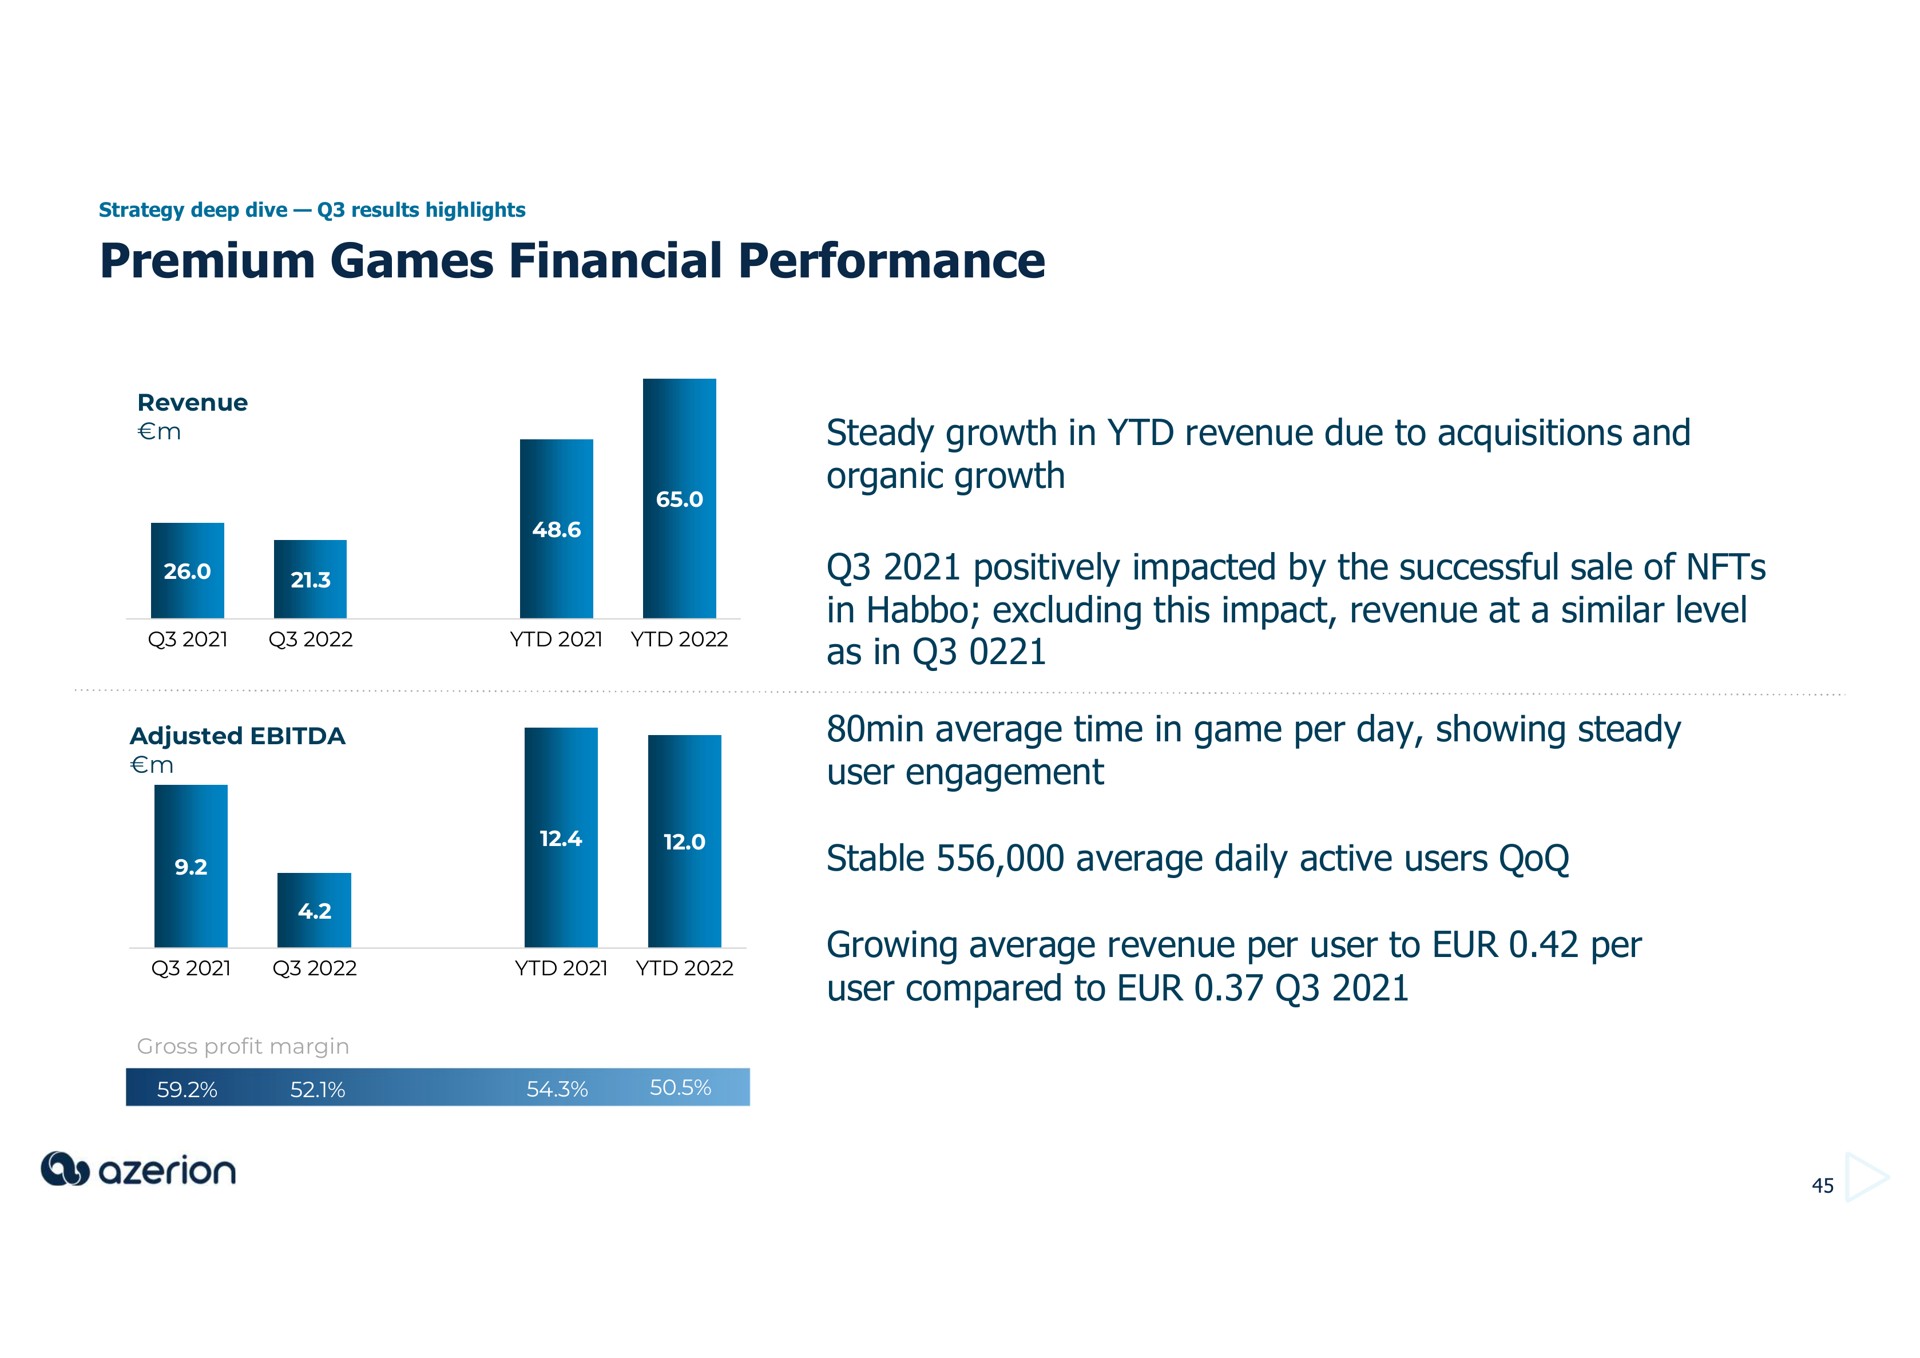 premium games financial performance steady growth in revenue due to acquisitions and organic growth positively impacted by the successful sale of in excluding this impact revenue at a similar level as in min average time in game per day showing steady user engagement stable average daily active users growing average revenue per user to per user compared to | Azerion